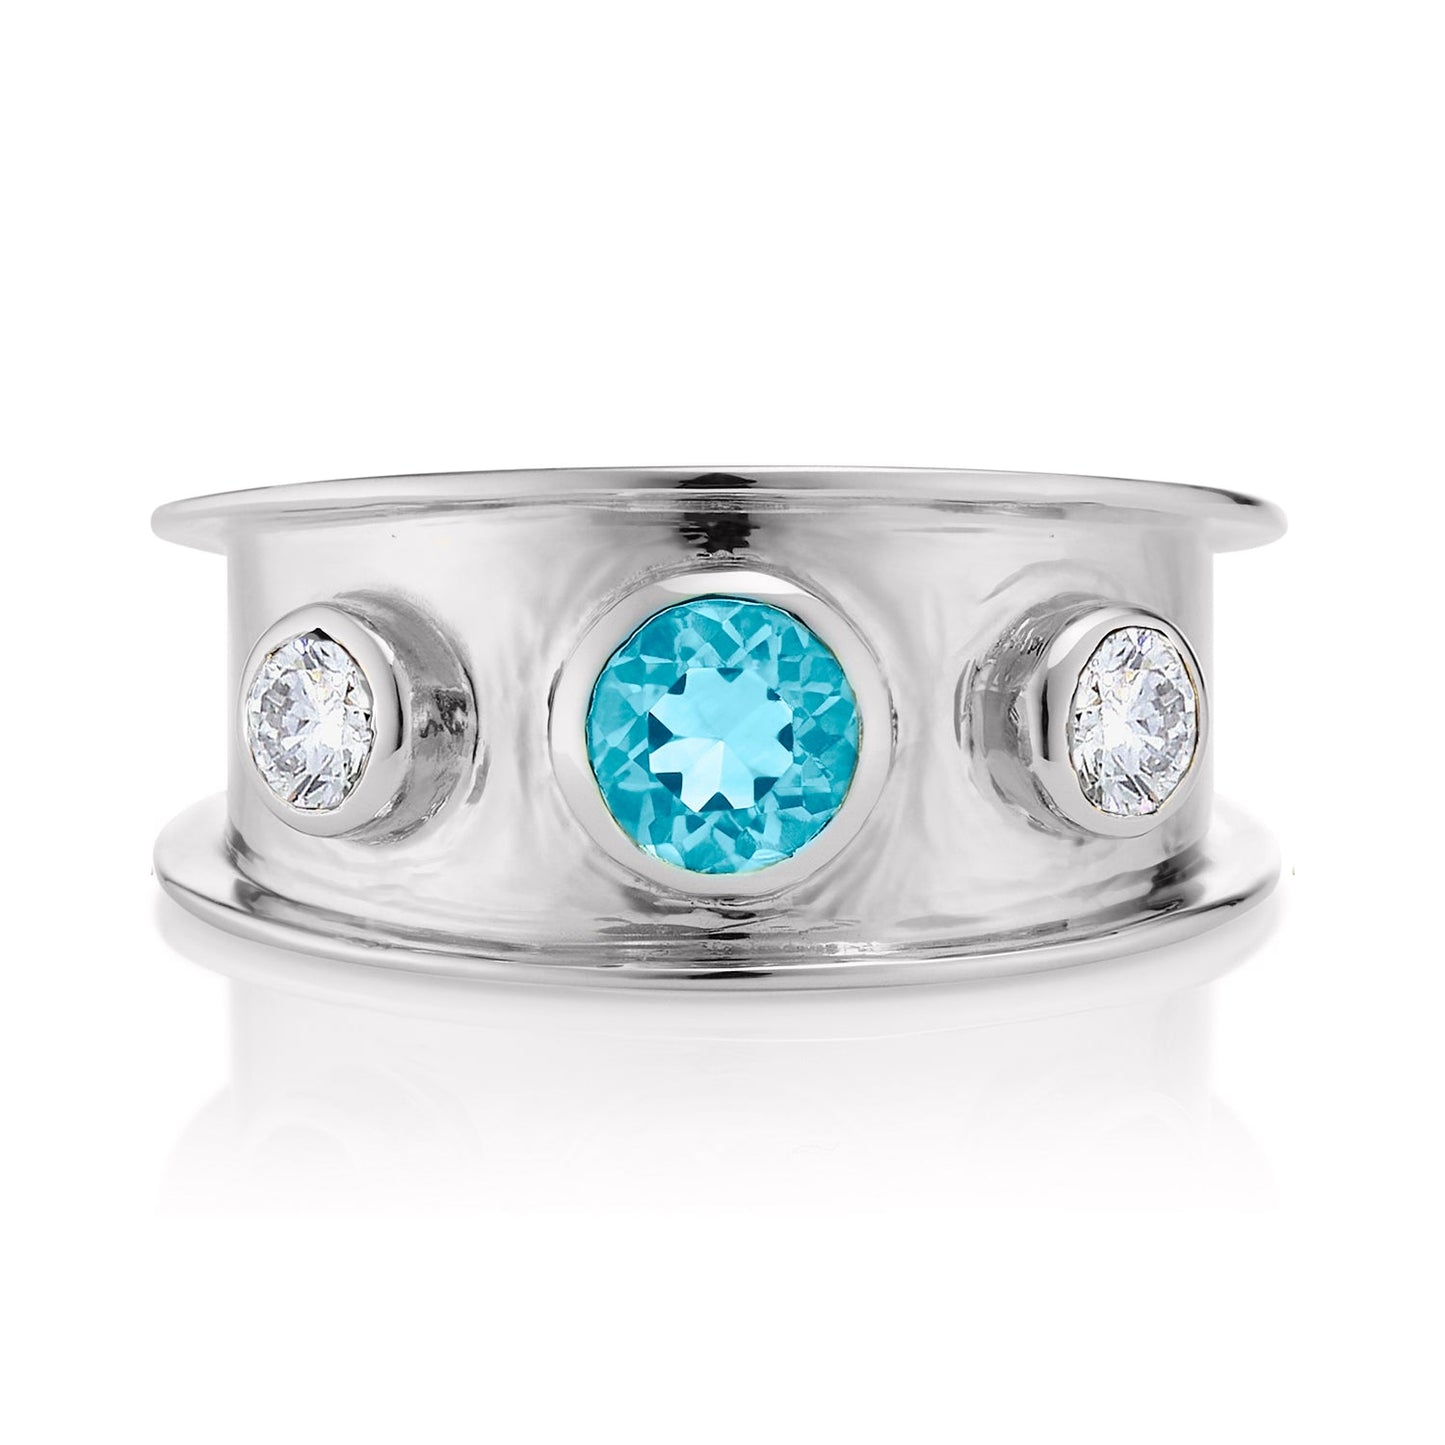 Load image into Gallery viewer, London-made luxury custom gold gemstone jewellery -9ct White Gold Statement Ring in Blue Topaz and White Topaz – Andalusian Collection, Augustine Jewellery, British Jewellers, Gemstone Jewellery, Luxury Jewellery London.
